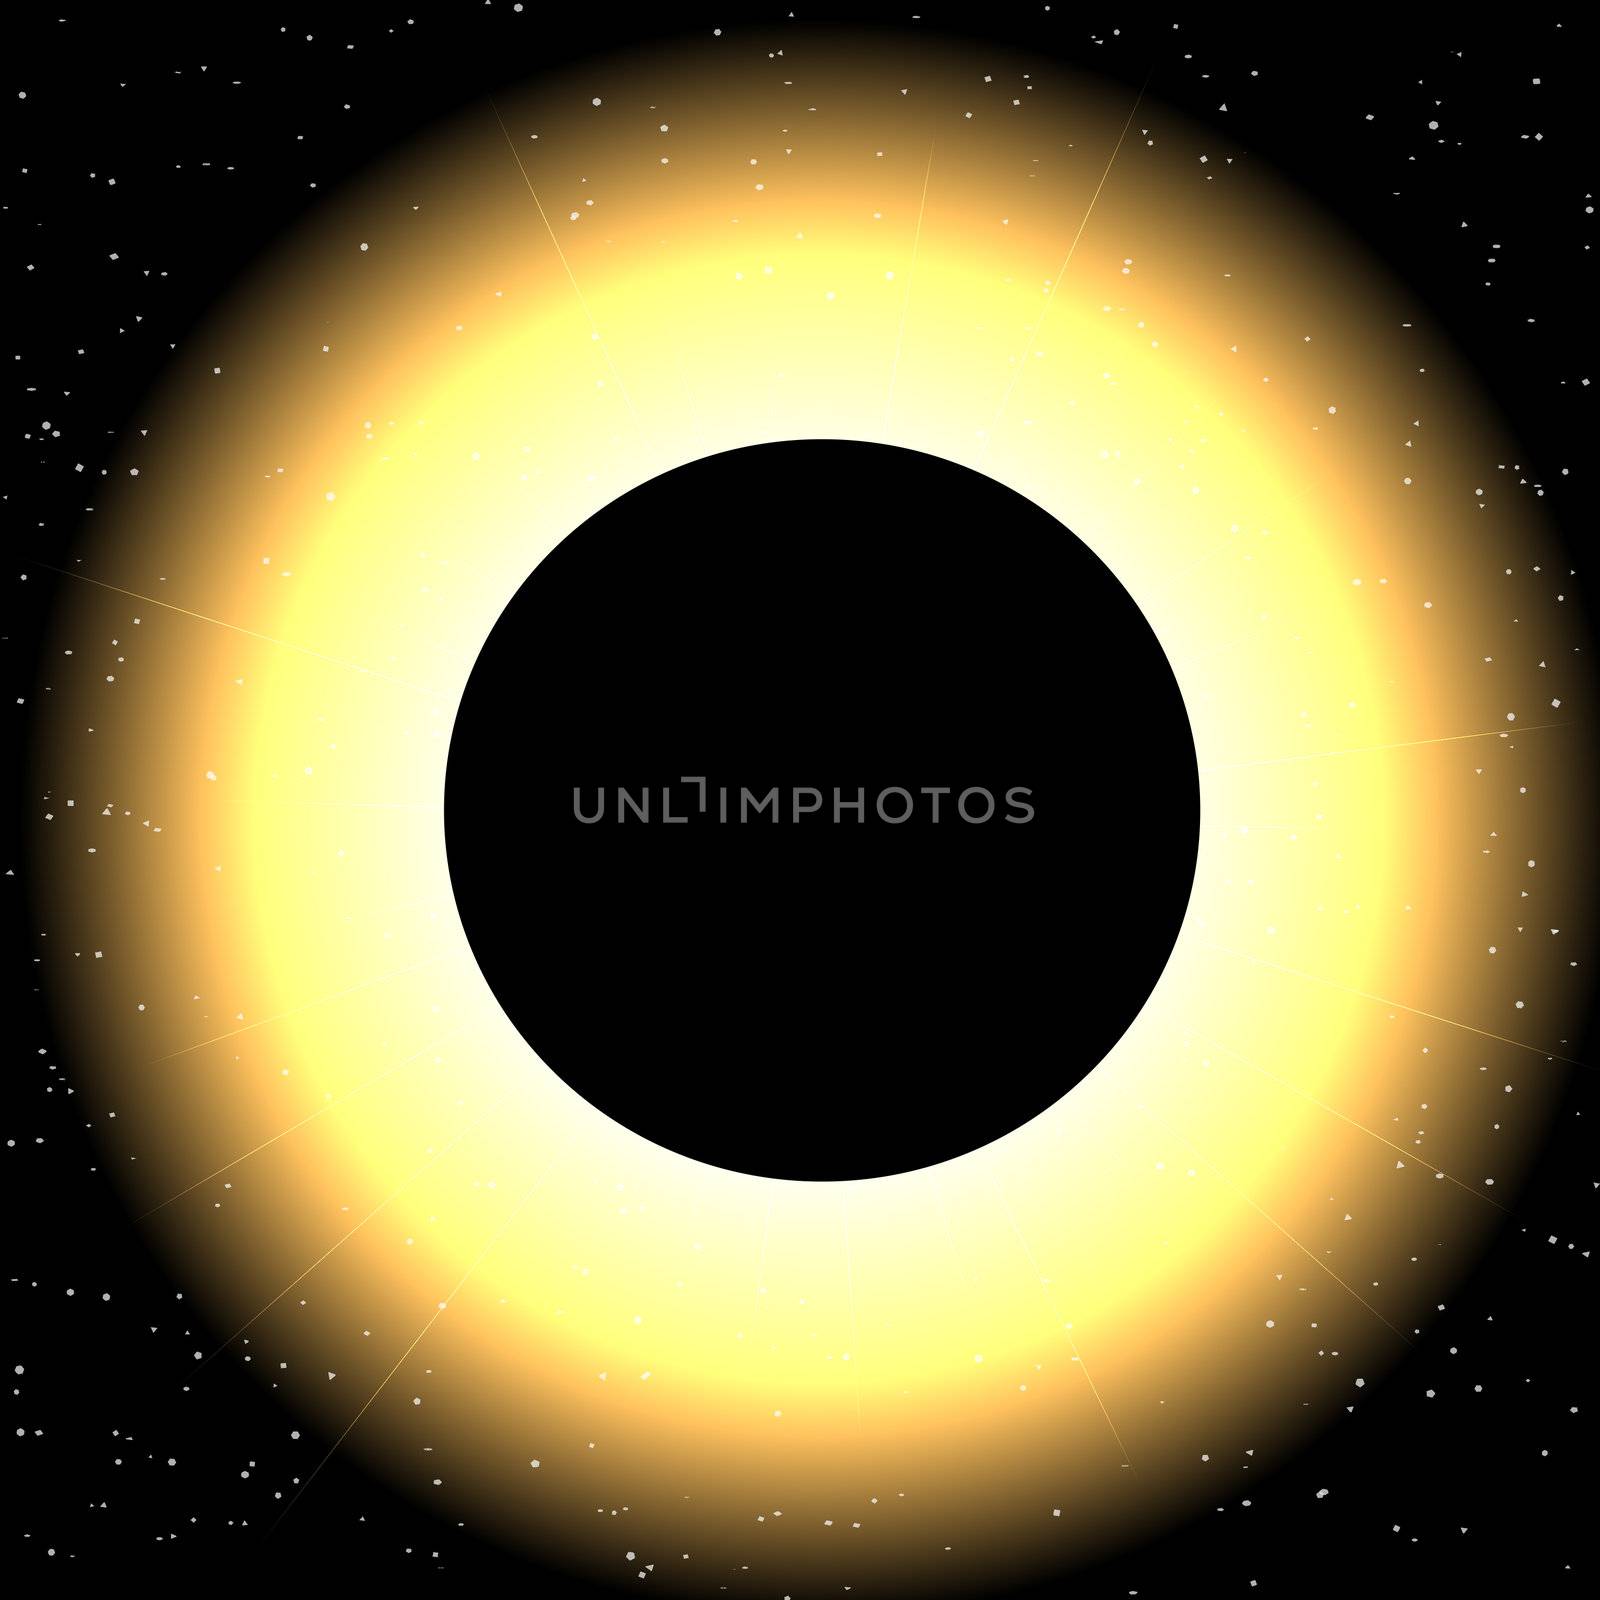 A illustration of an eclipse of a bright object in space